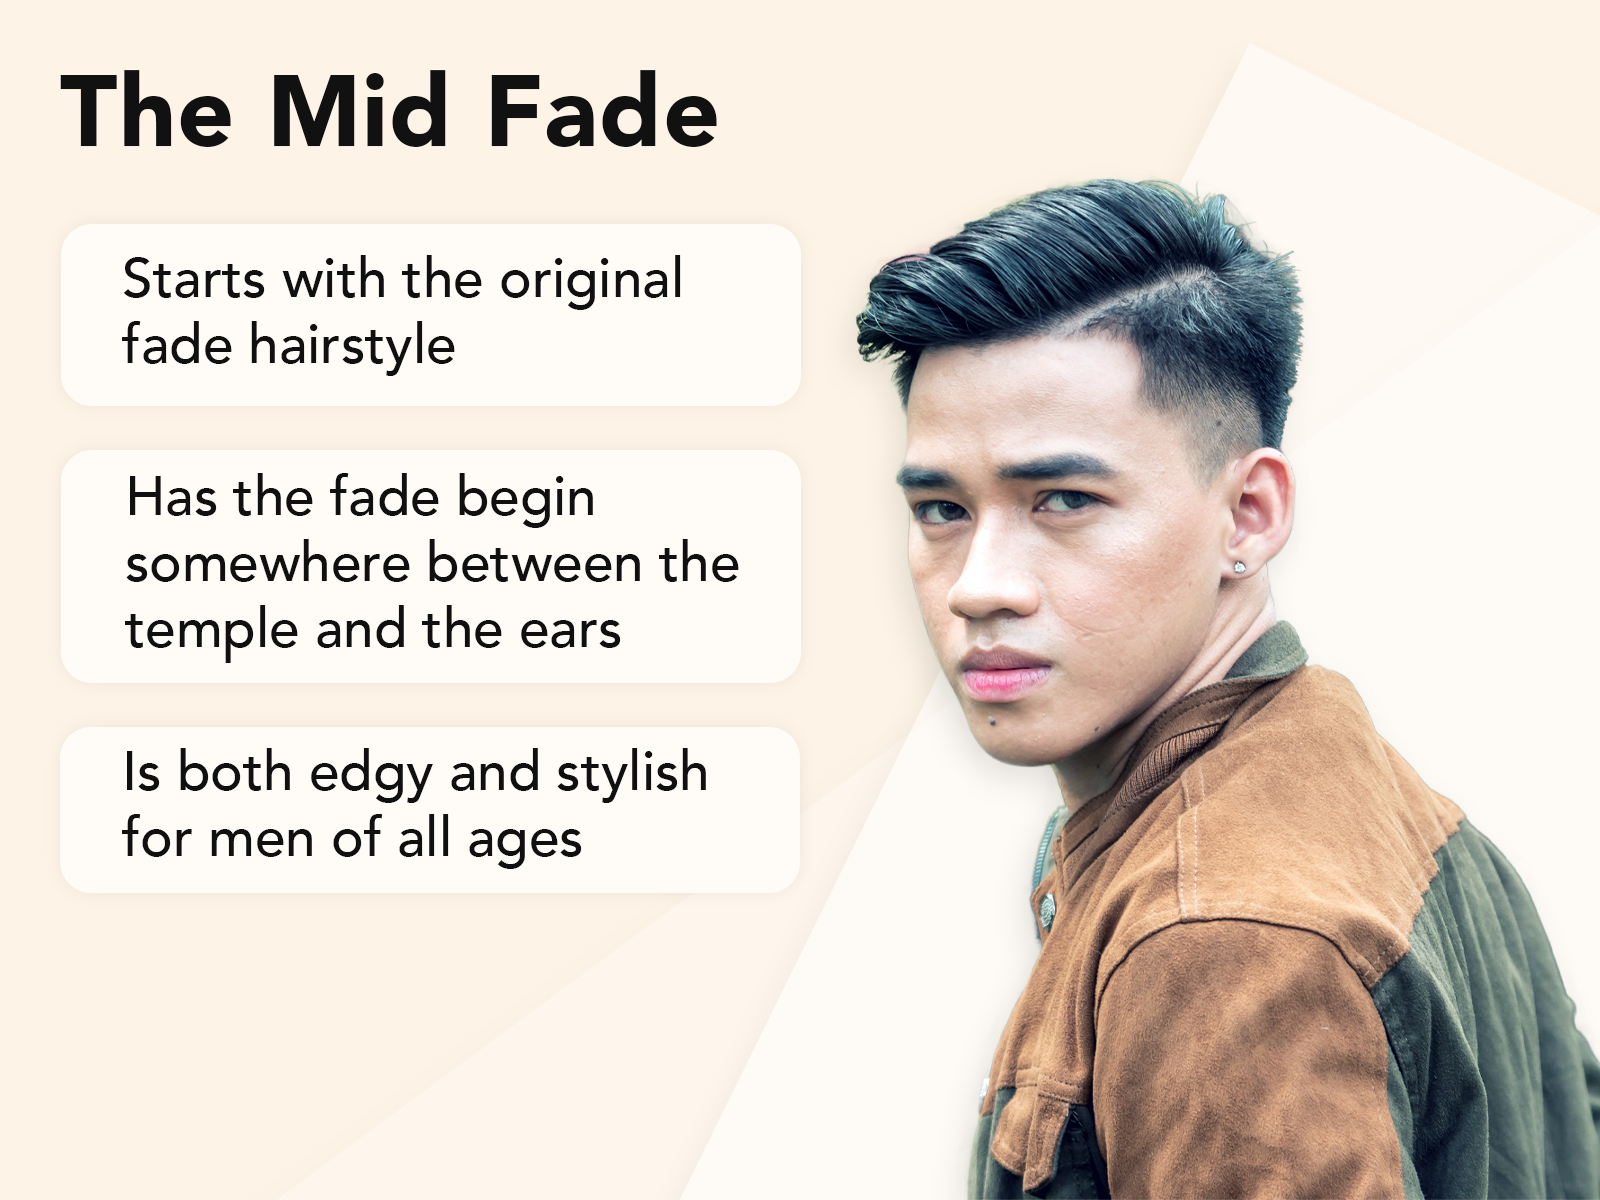 Explainer image showing the mid fade hairstyle with a tan background